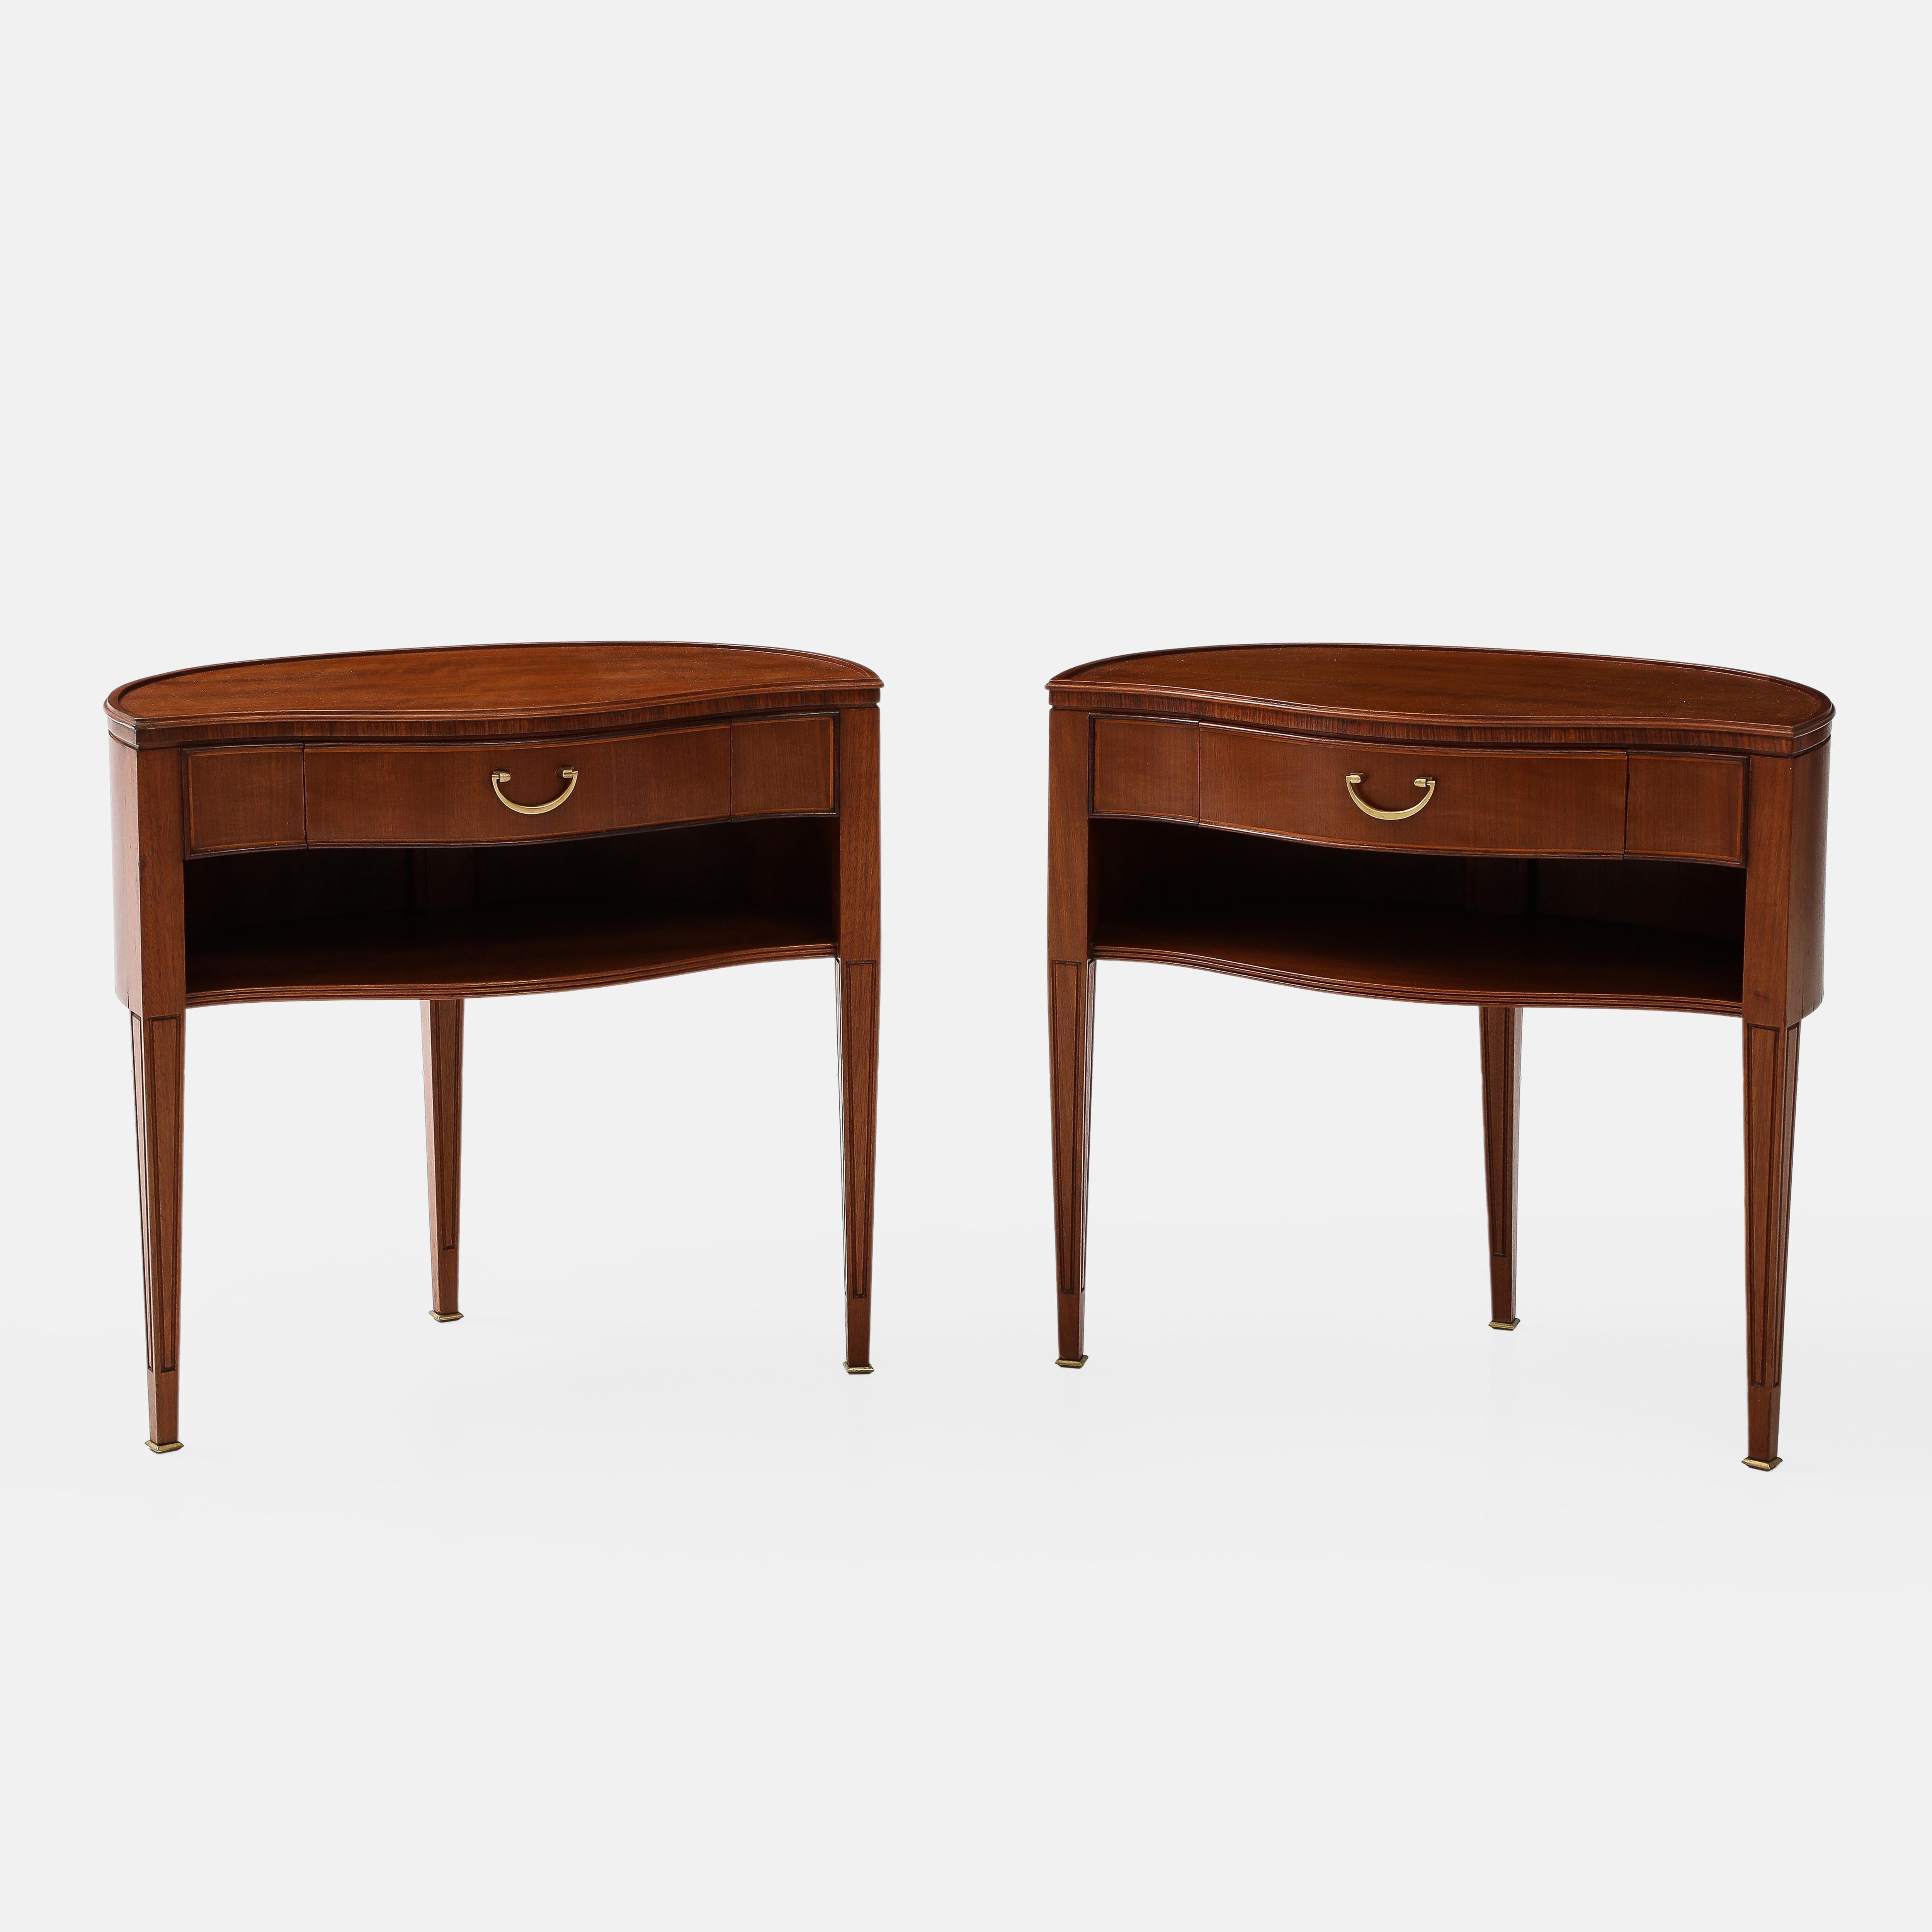 1950s Paolo Buffa pair of polished mahogany nightstands or bedside tables with three tapering legs ending in brass sabots.  These elegant nightstands have a lovely curvaceous front and demilune shaped back and each hold a single drawer with an open